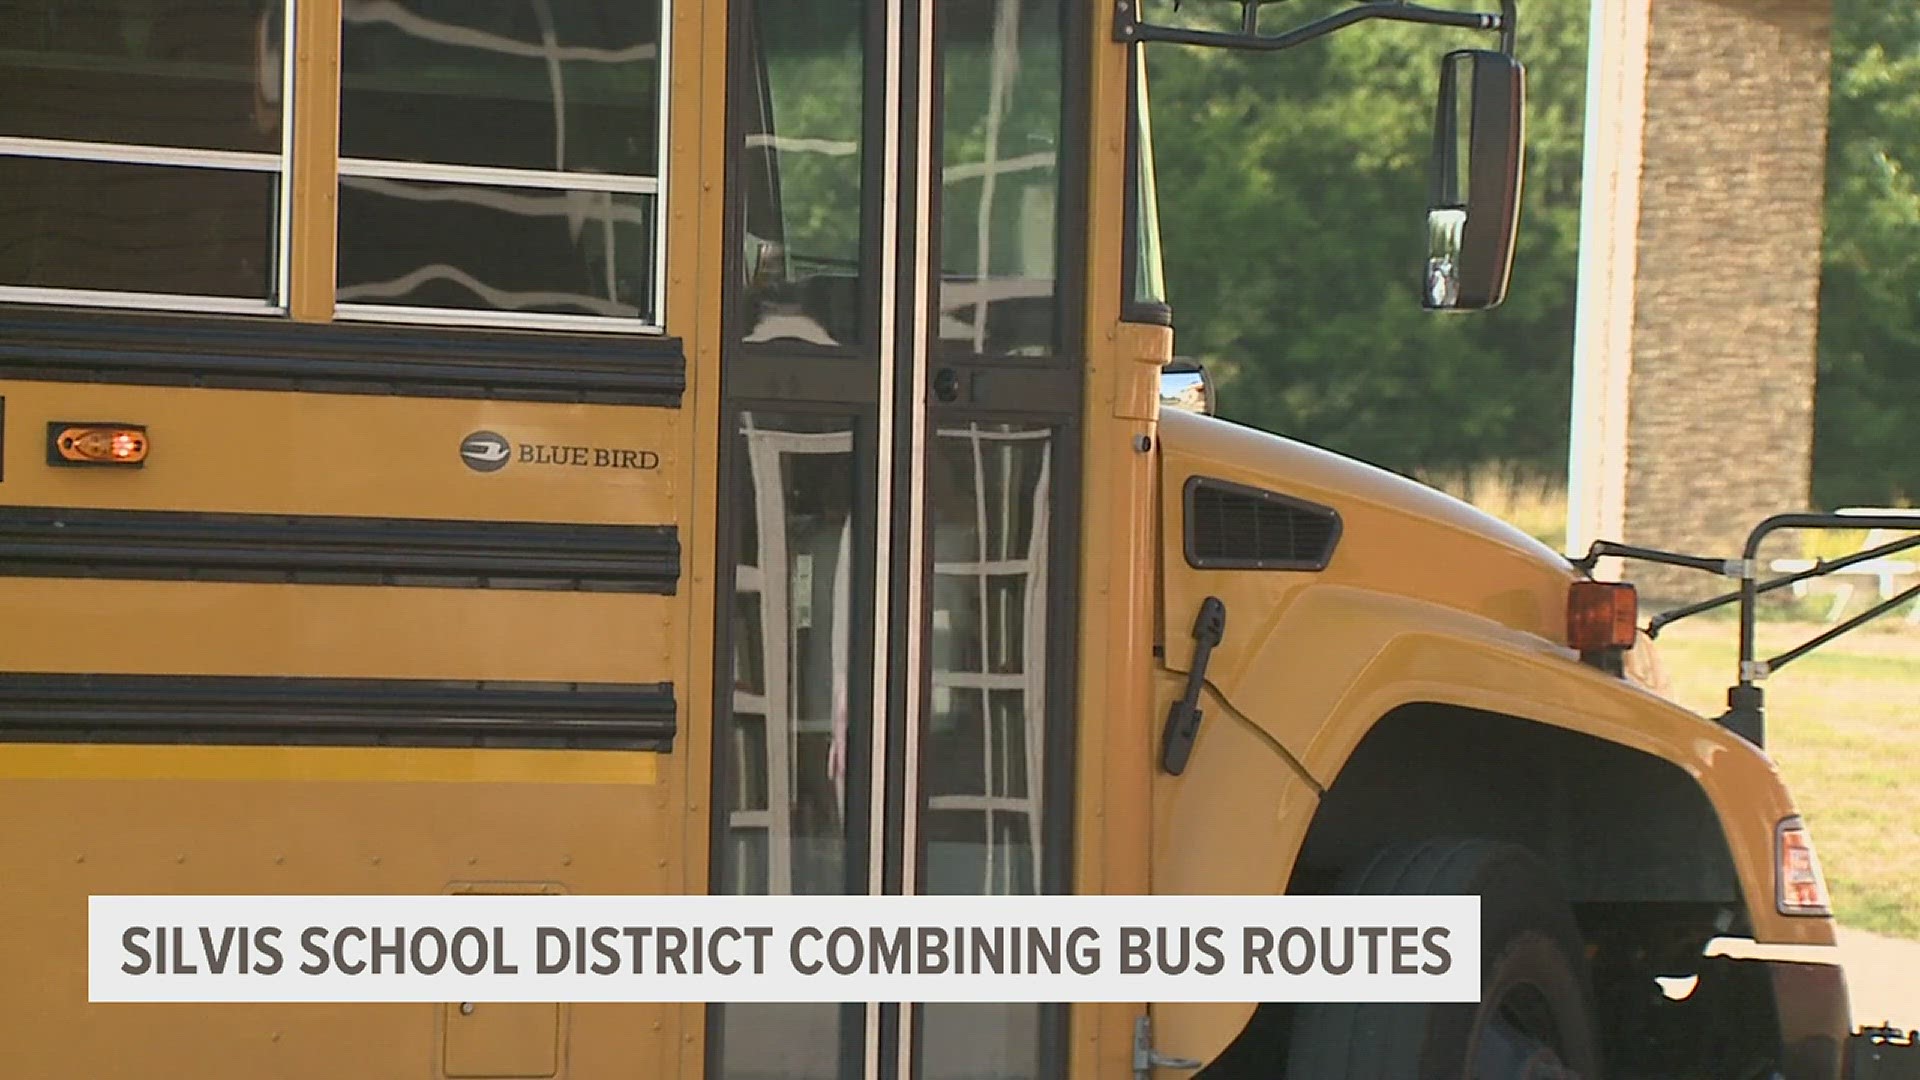 Bus routes are being combined Thursday, Sept. 14 and Friday, Sept. 15.